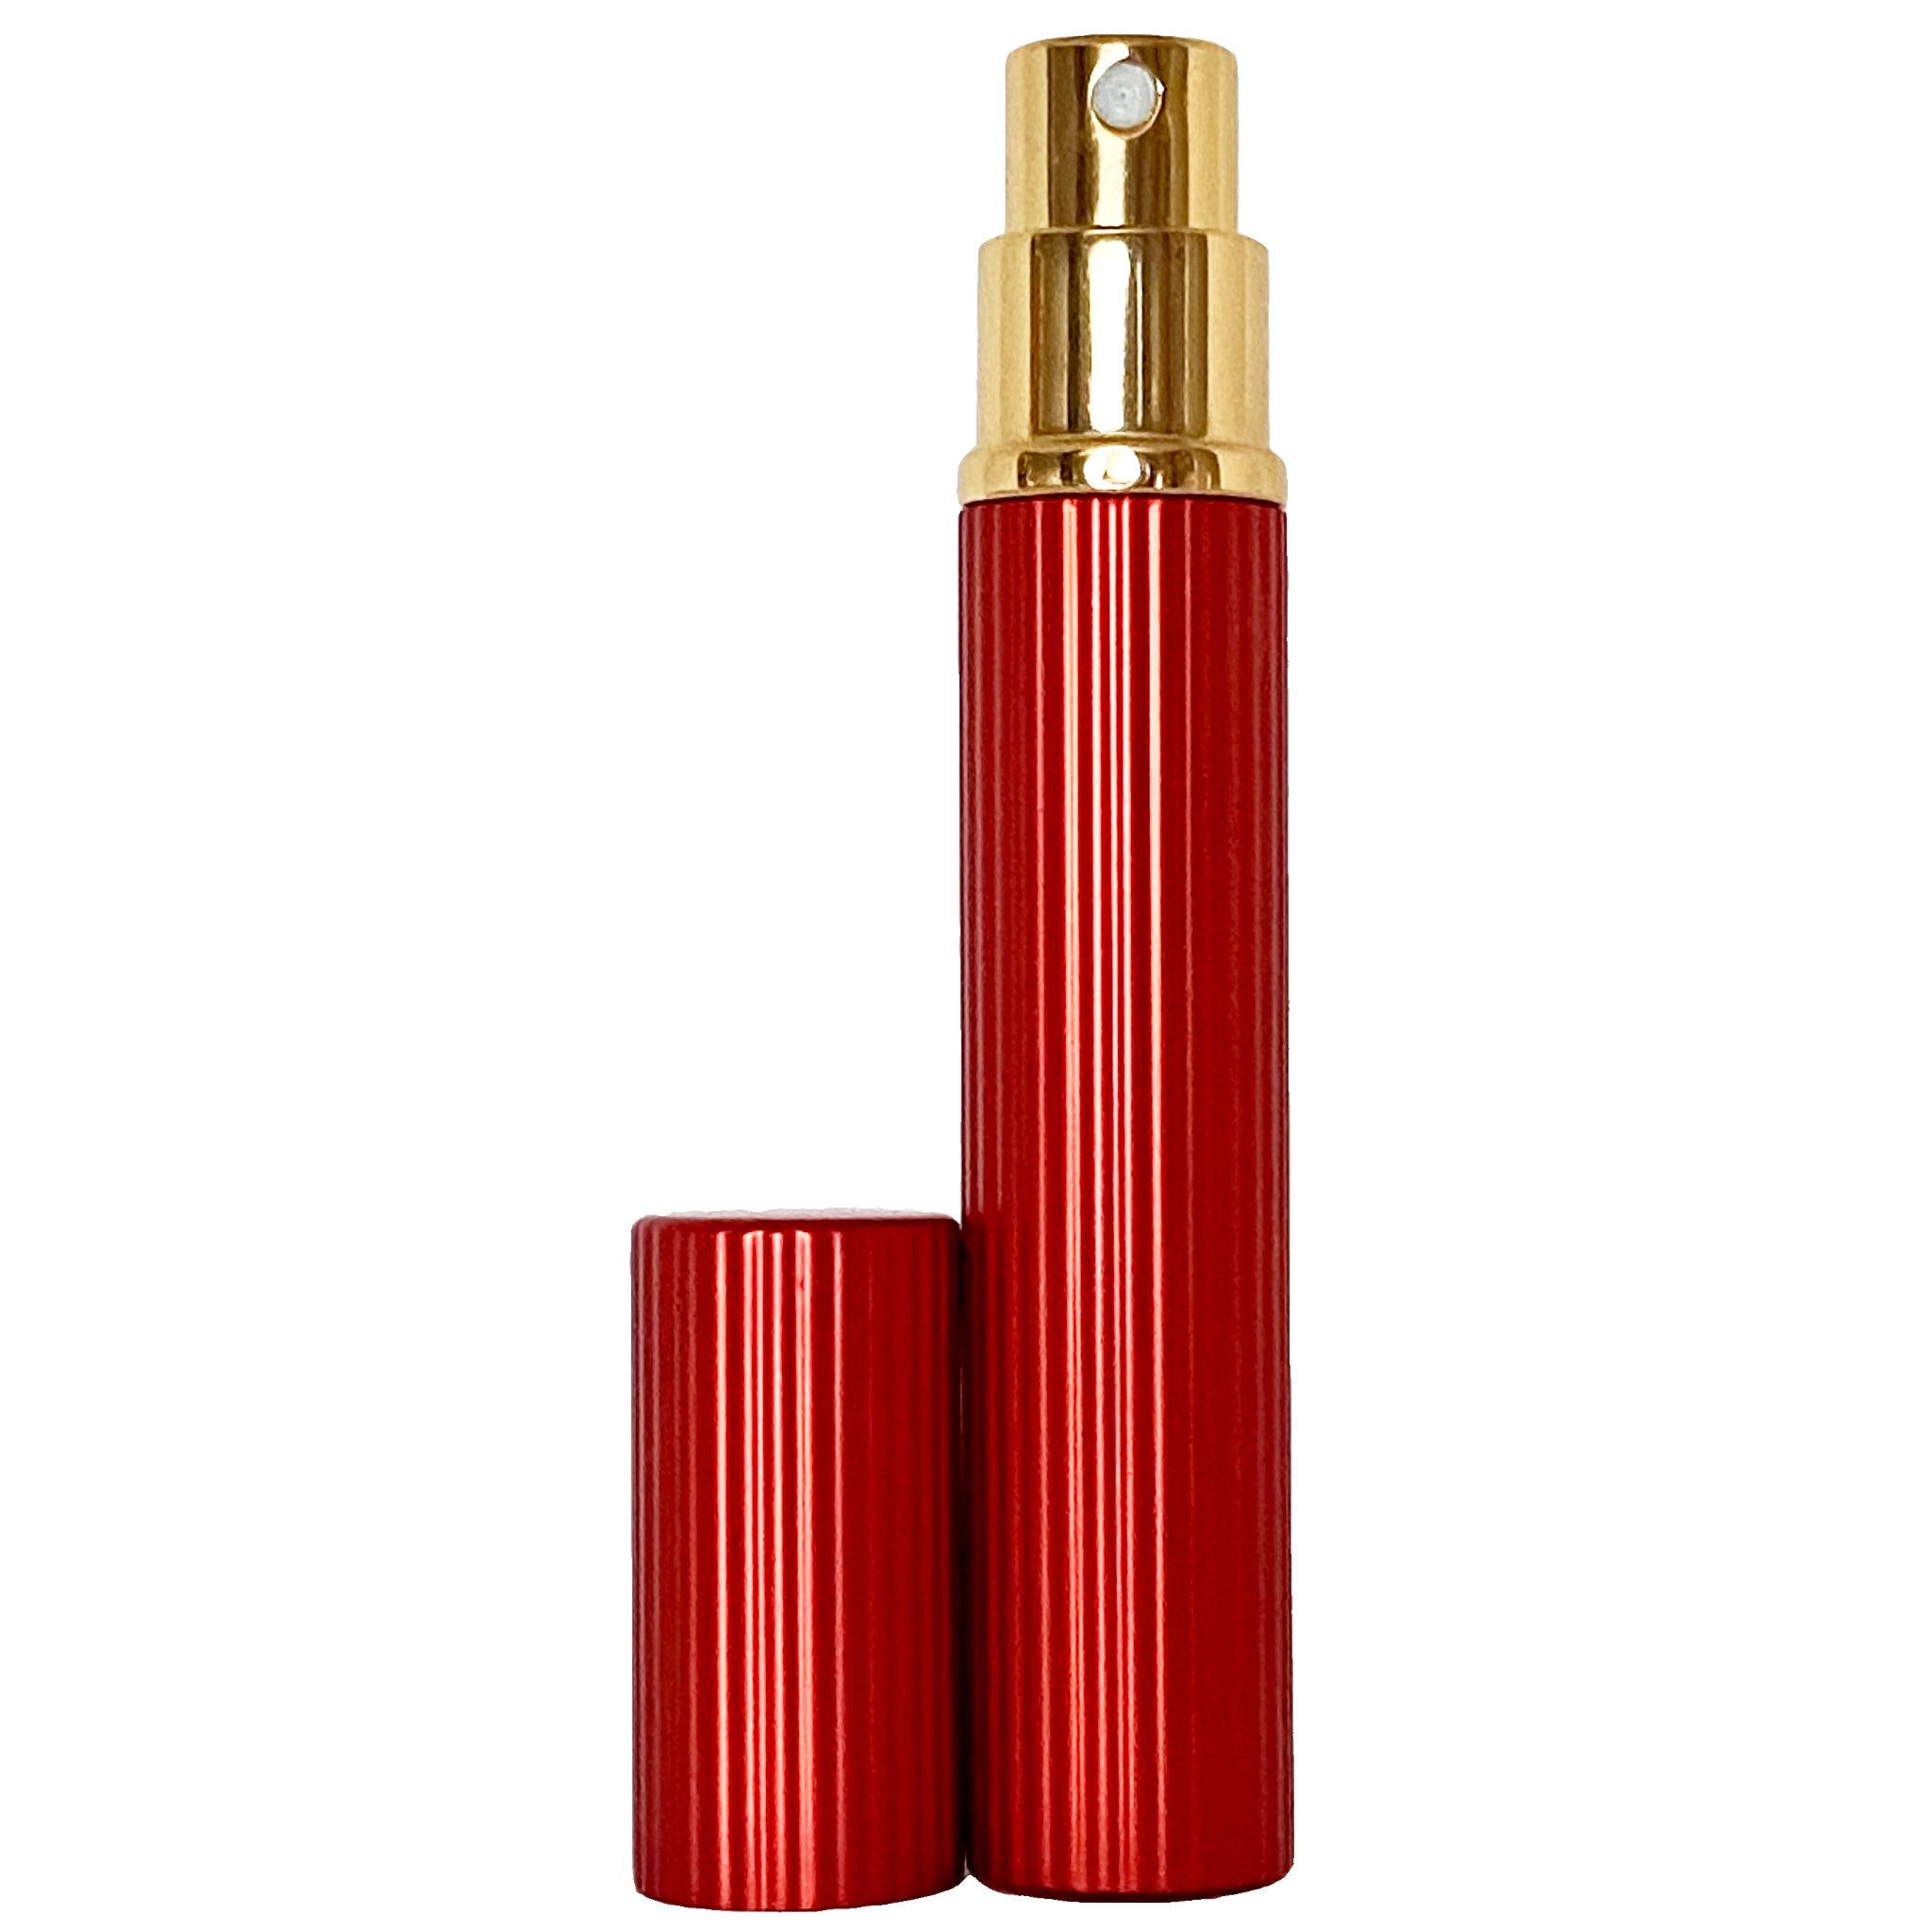 8ml 0.27oz Red Perfume Glass Spray Deluxe Bottles Gold Atomizers